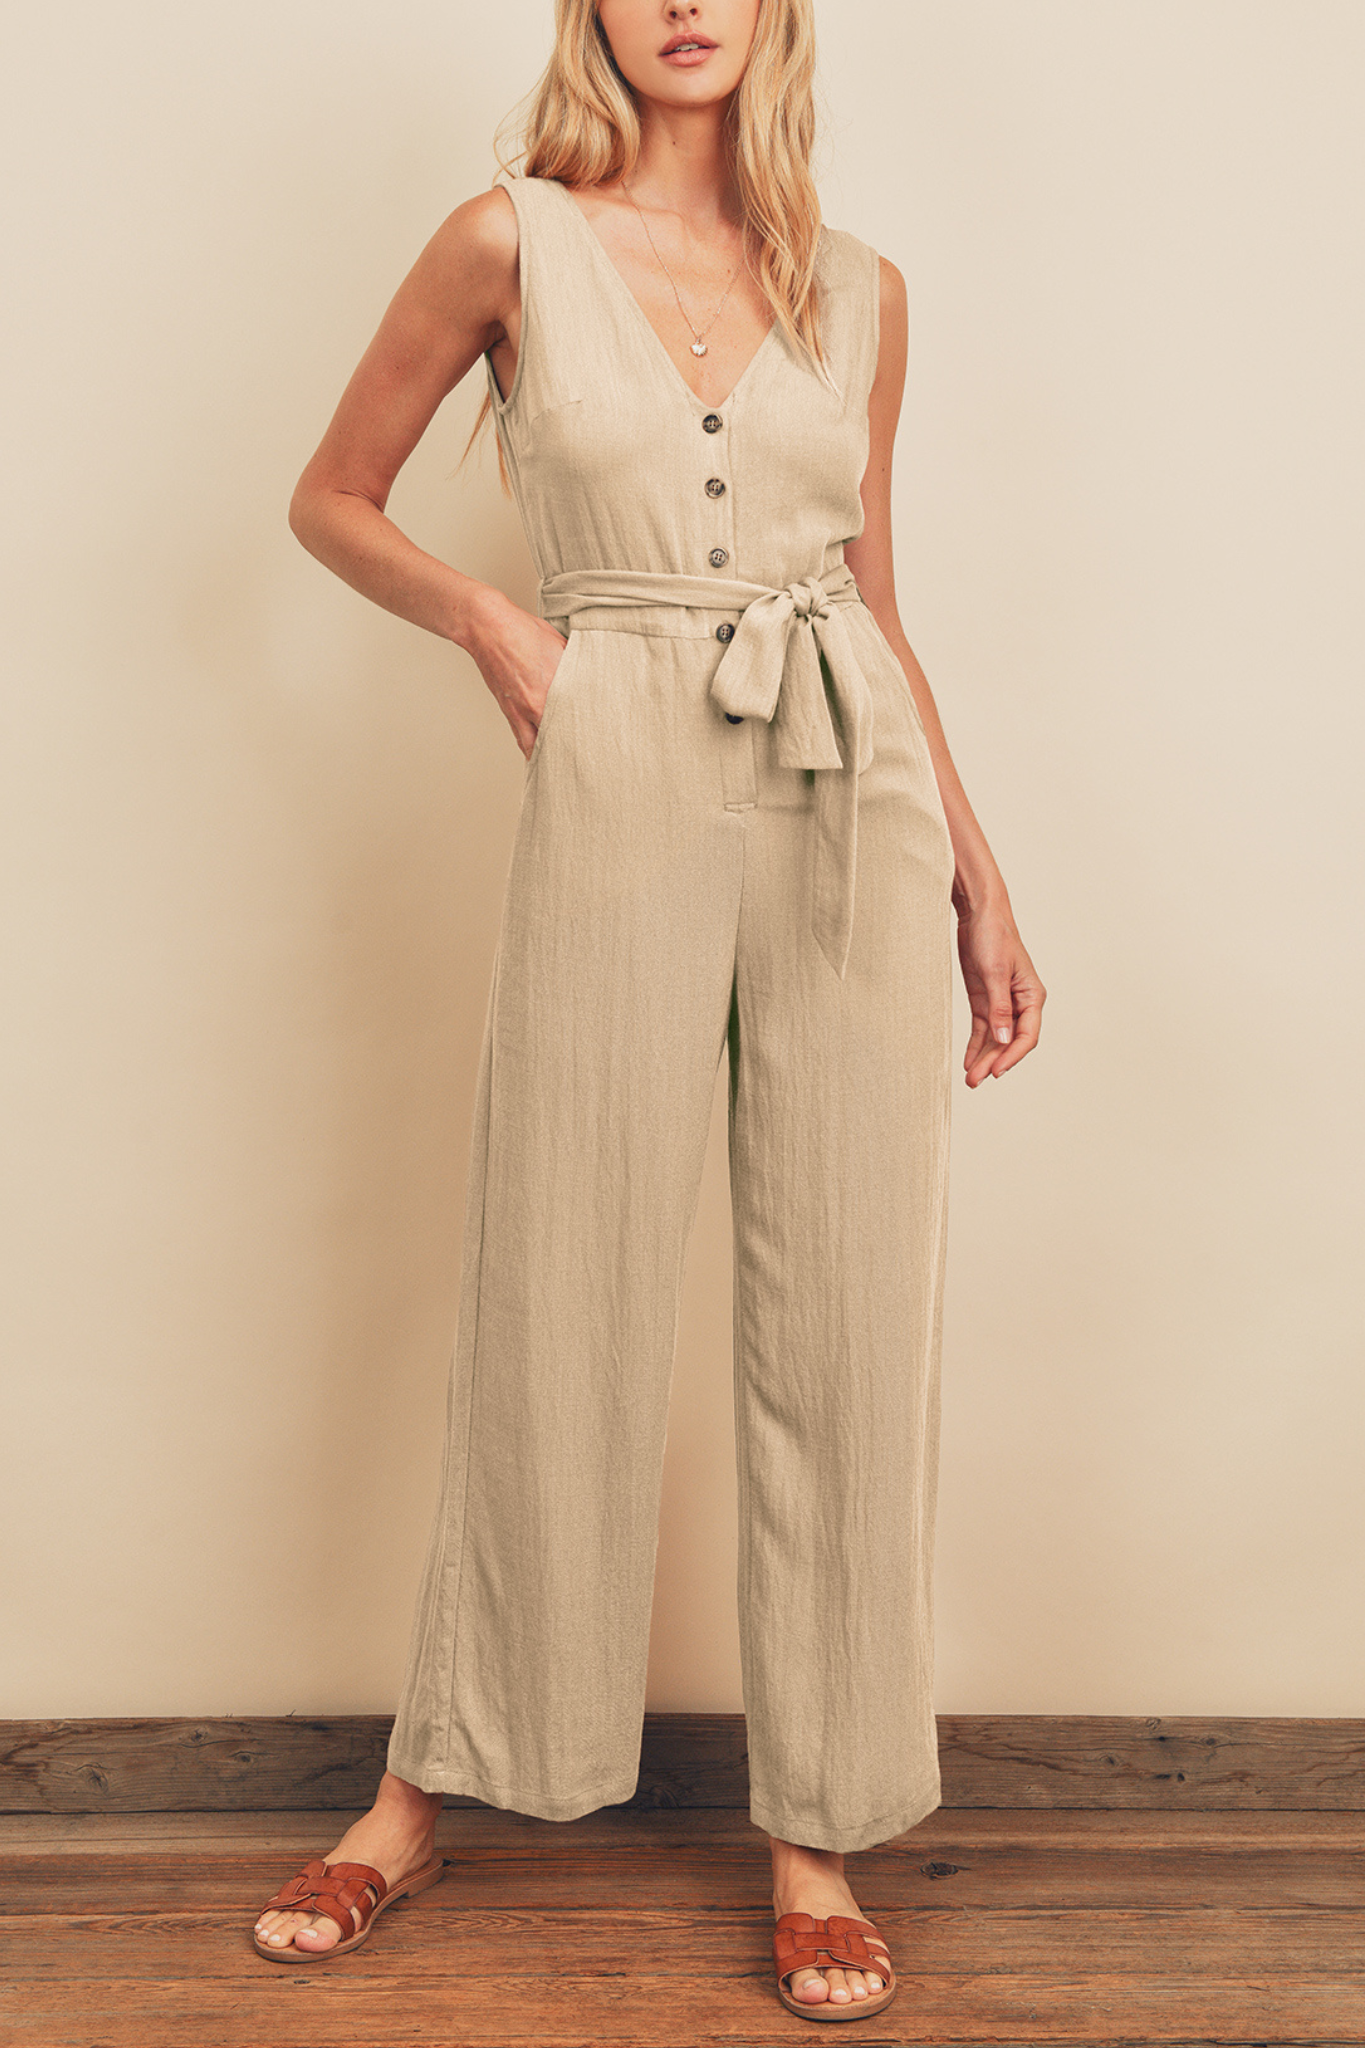 View 8 of Medanos Jumpsuit, a Jumpsuits from Larrea Cove. Detail: .